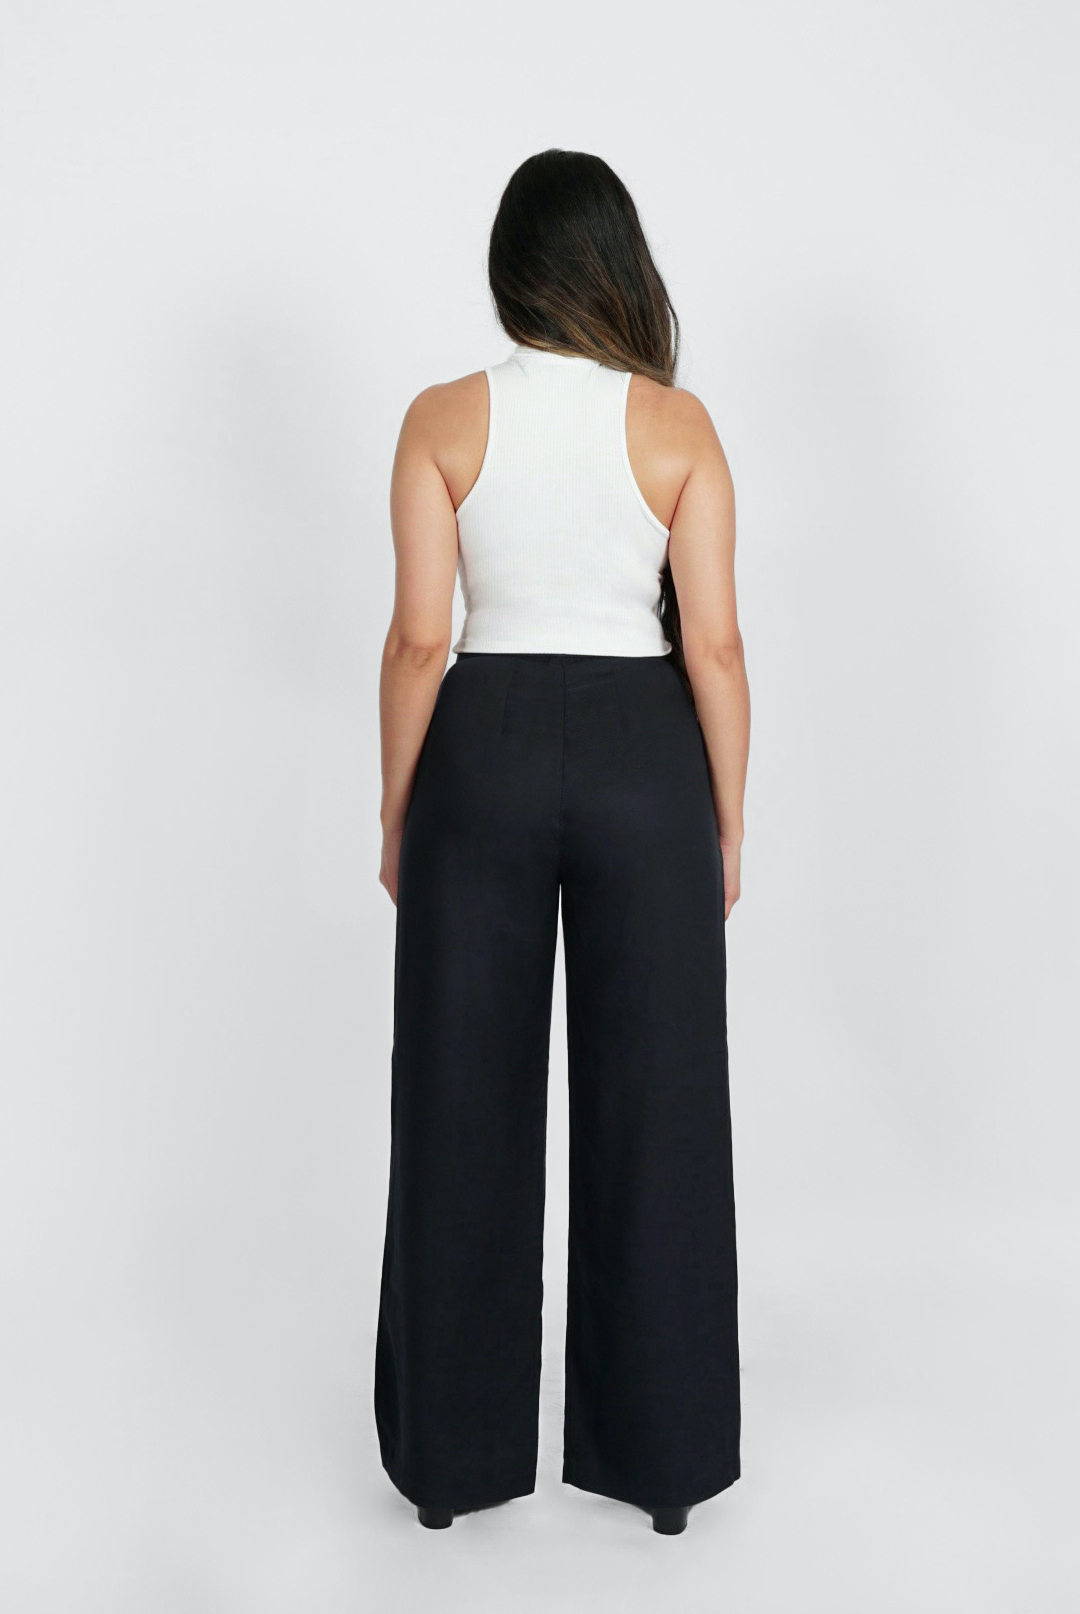 Are the materials similar in flow for these two wide leg pants